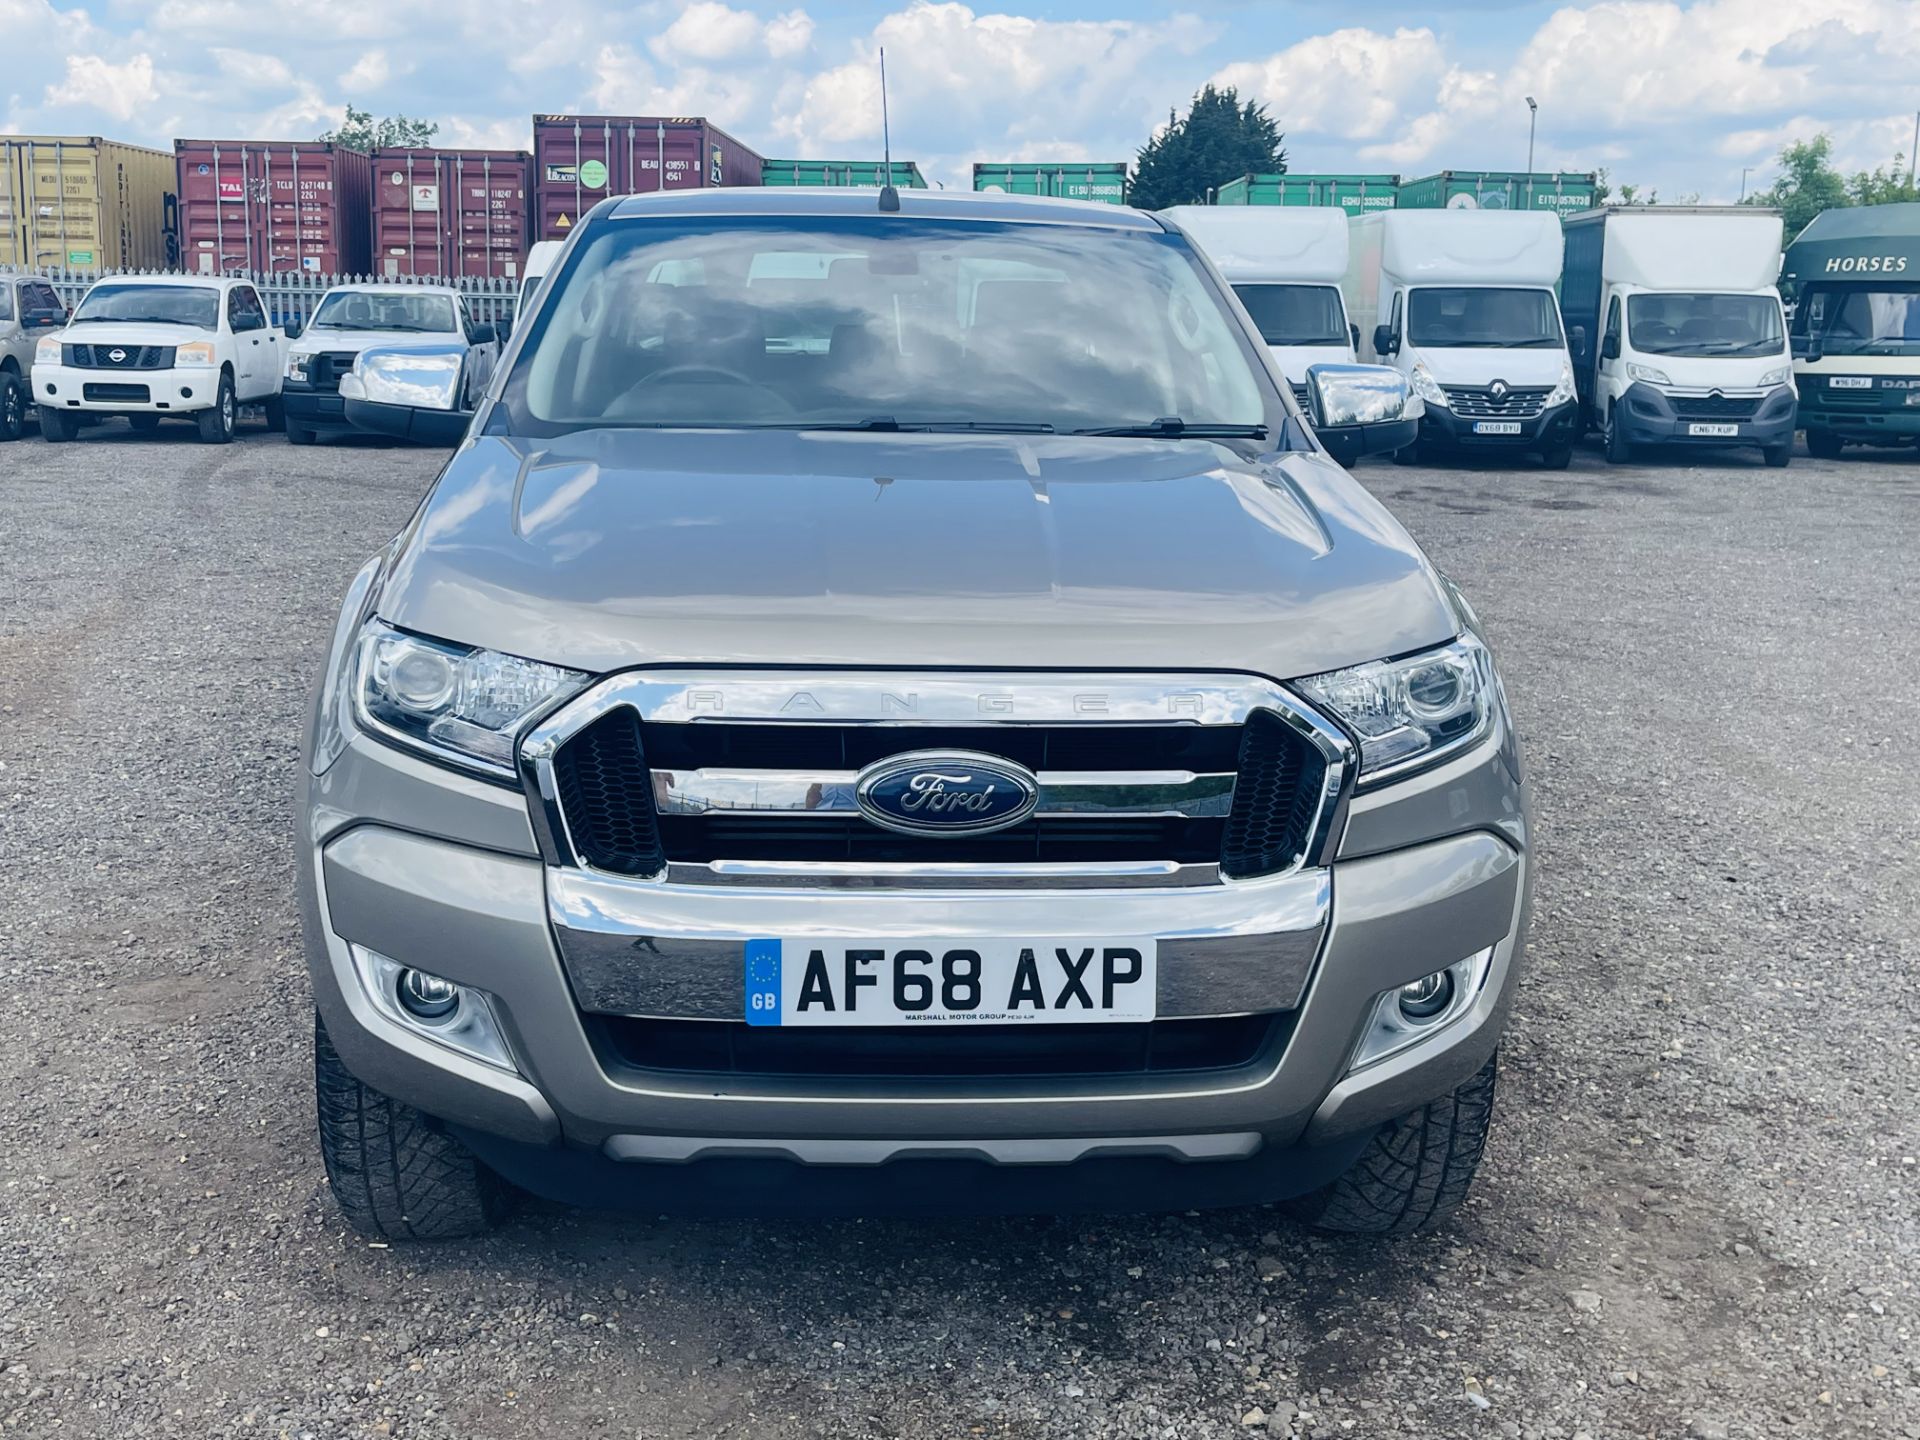 ** ON SALE ** Ford Ranger 3.2 TDCI Limited 2018 '68 Reg' Auto 4WD - Sat Nav - A/C - Euro 6 - Image 4 of 35